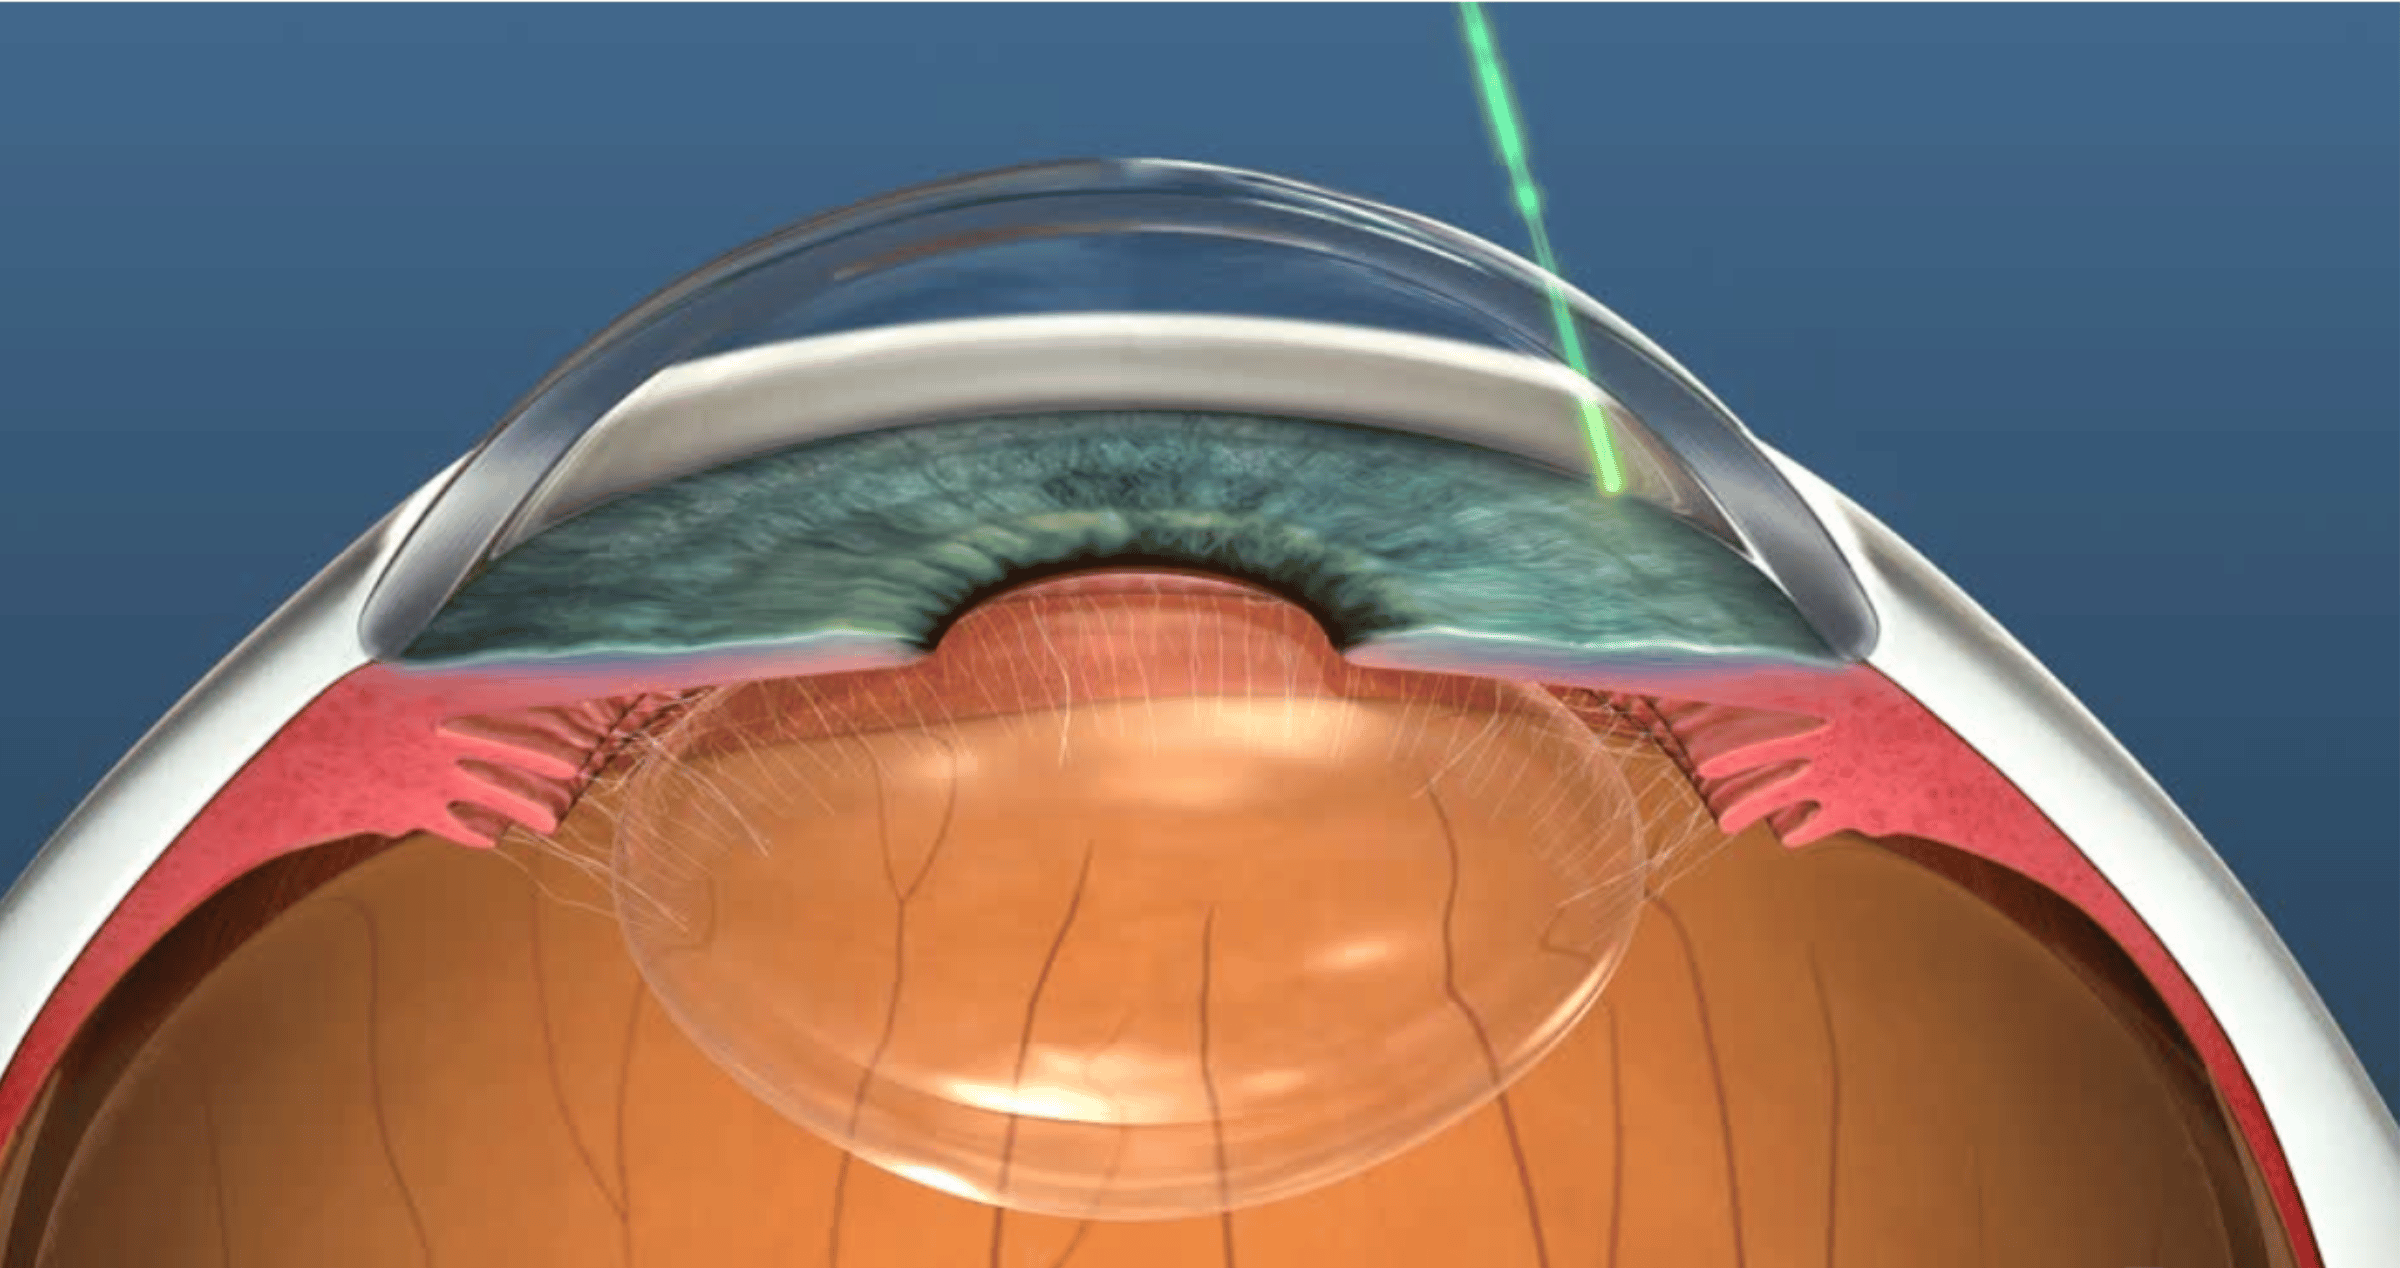 A computer generated graphic showing a cross-section of the human eye with a laser targeting the trabecular meshwork.